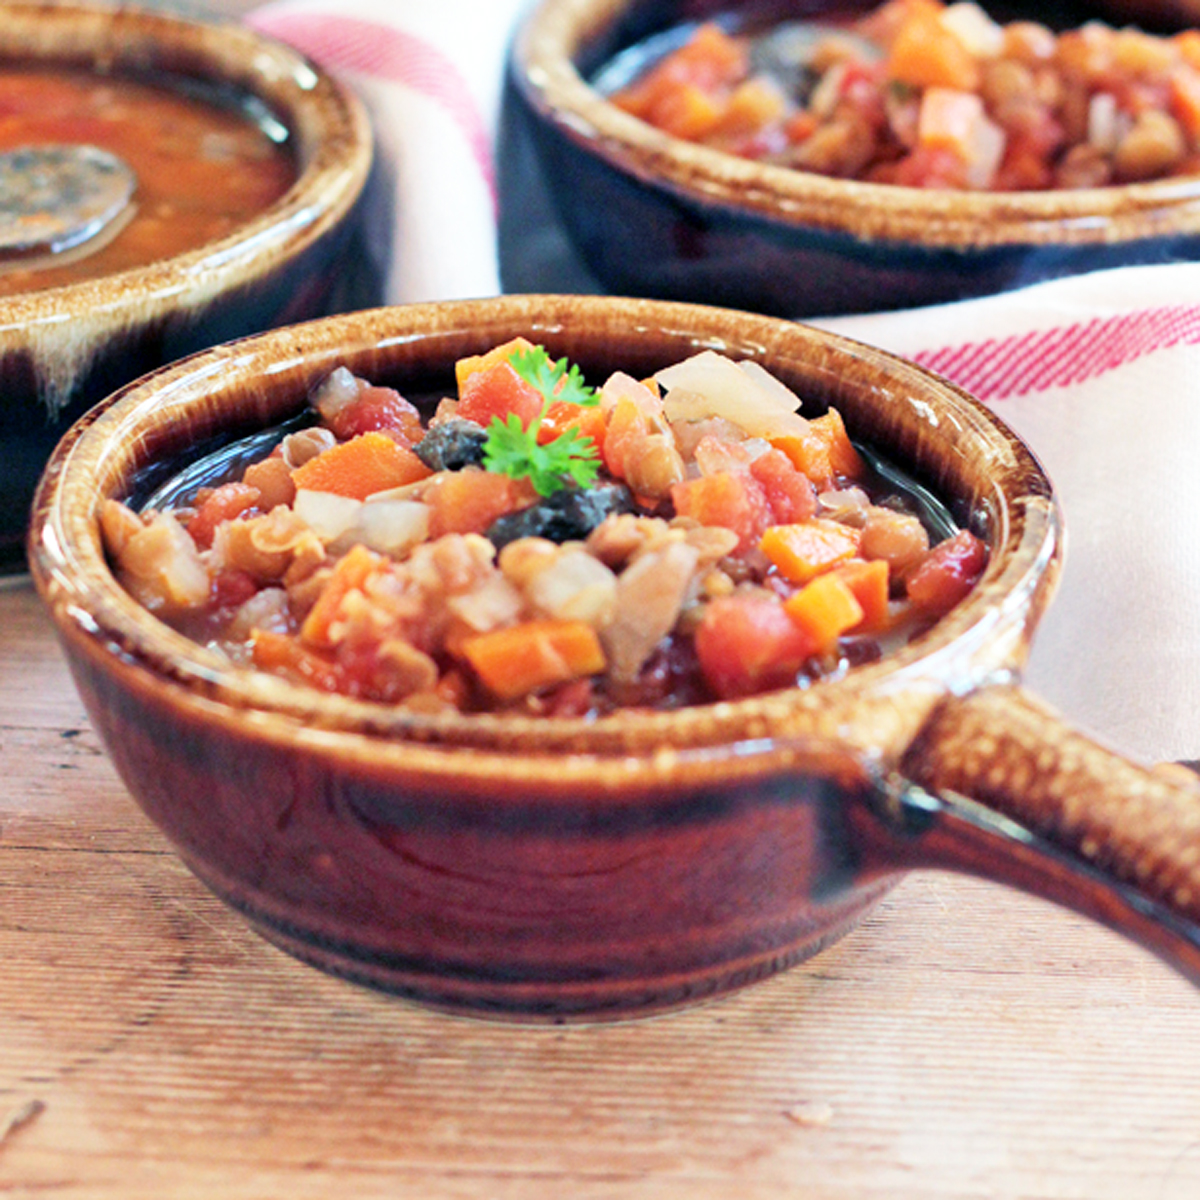 CopyCat Tomato Lentil Soup is delicious, nutritious, economical and environmentally friendly.